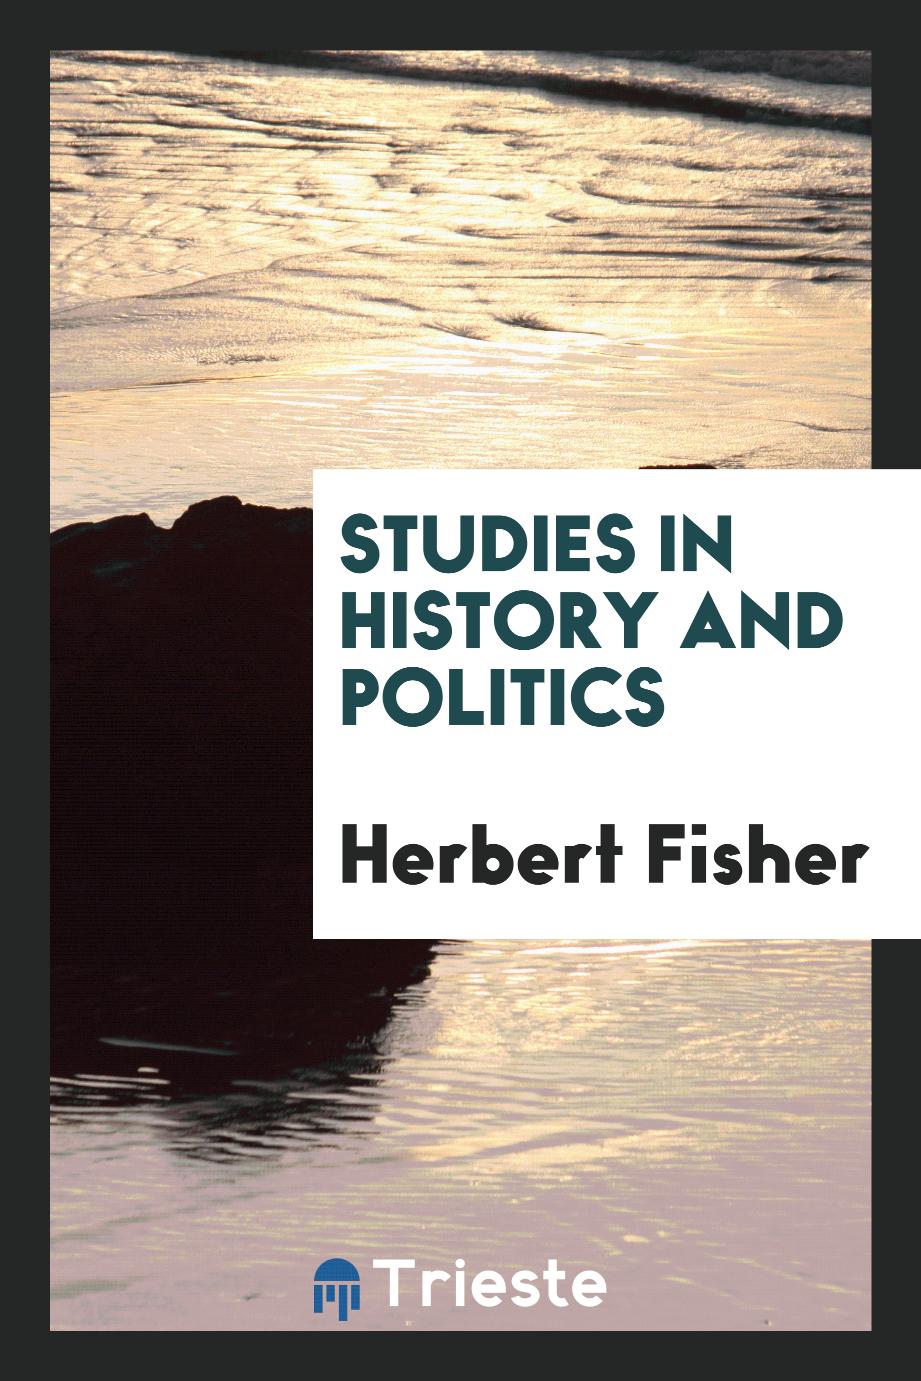 Studies in history and politics